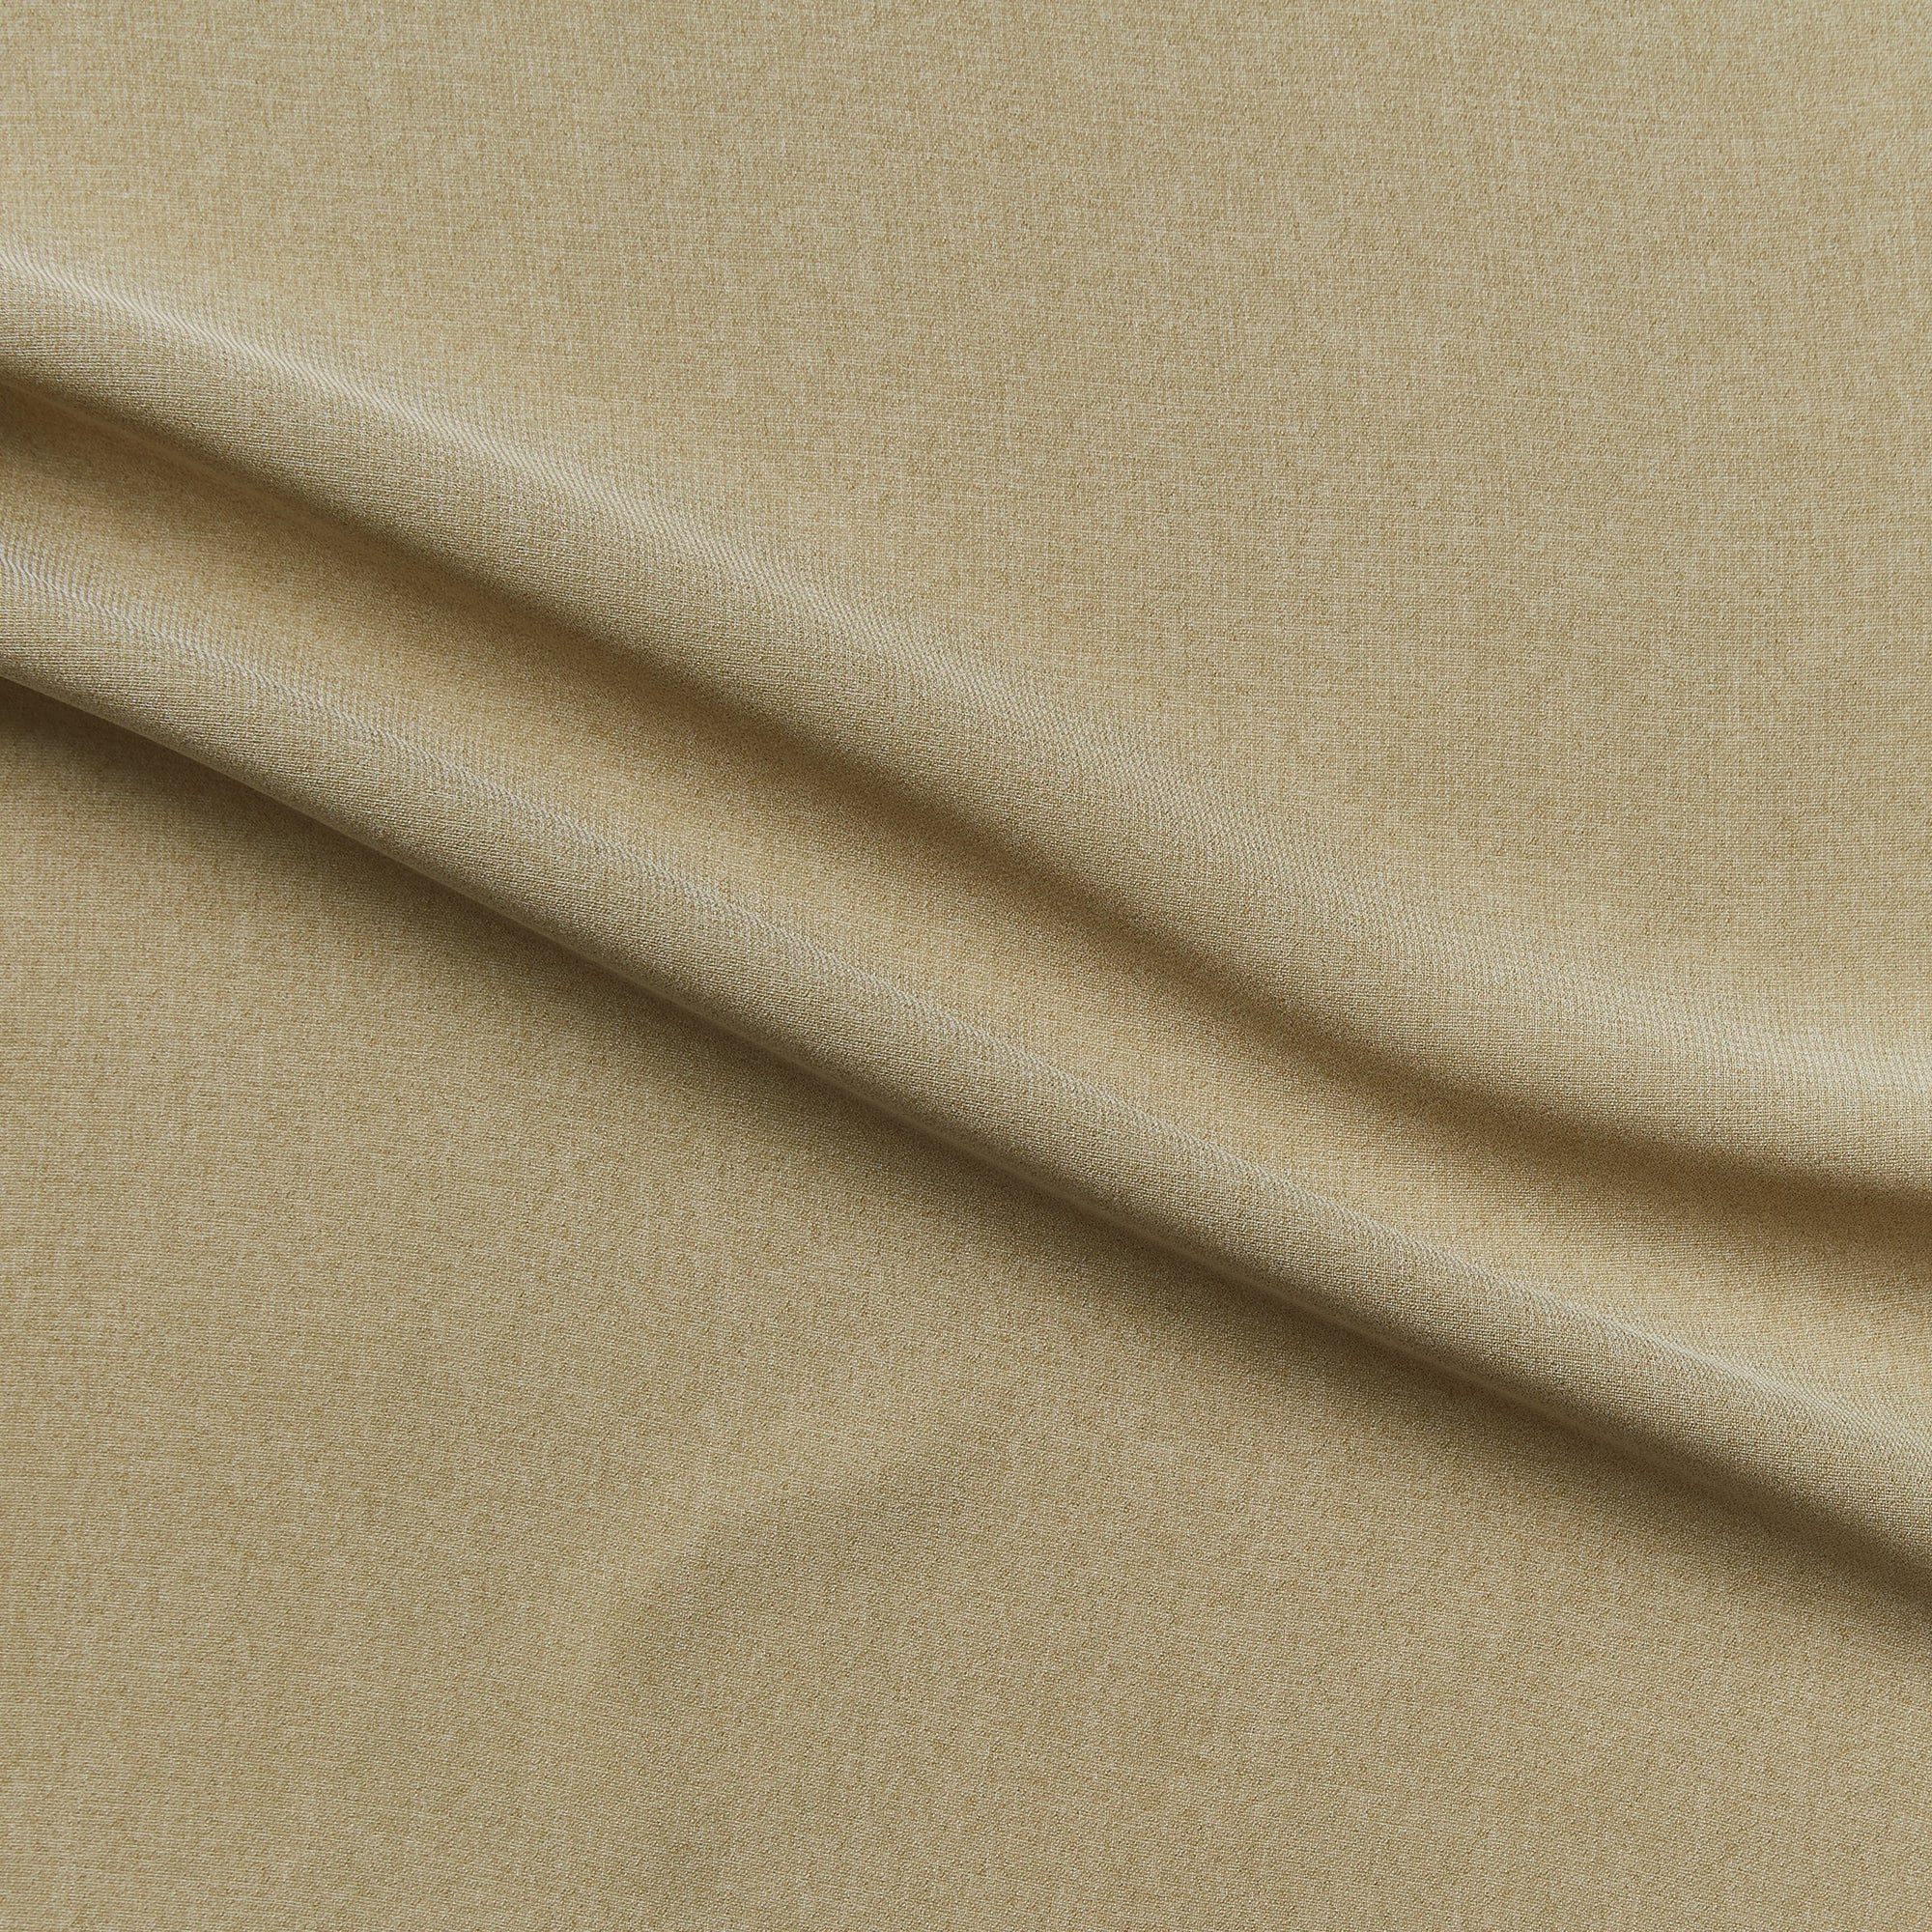 nicola displaying the taupe colored version of a soft semi sheer solid woven pure polyester with fluid drape